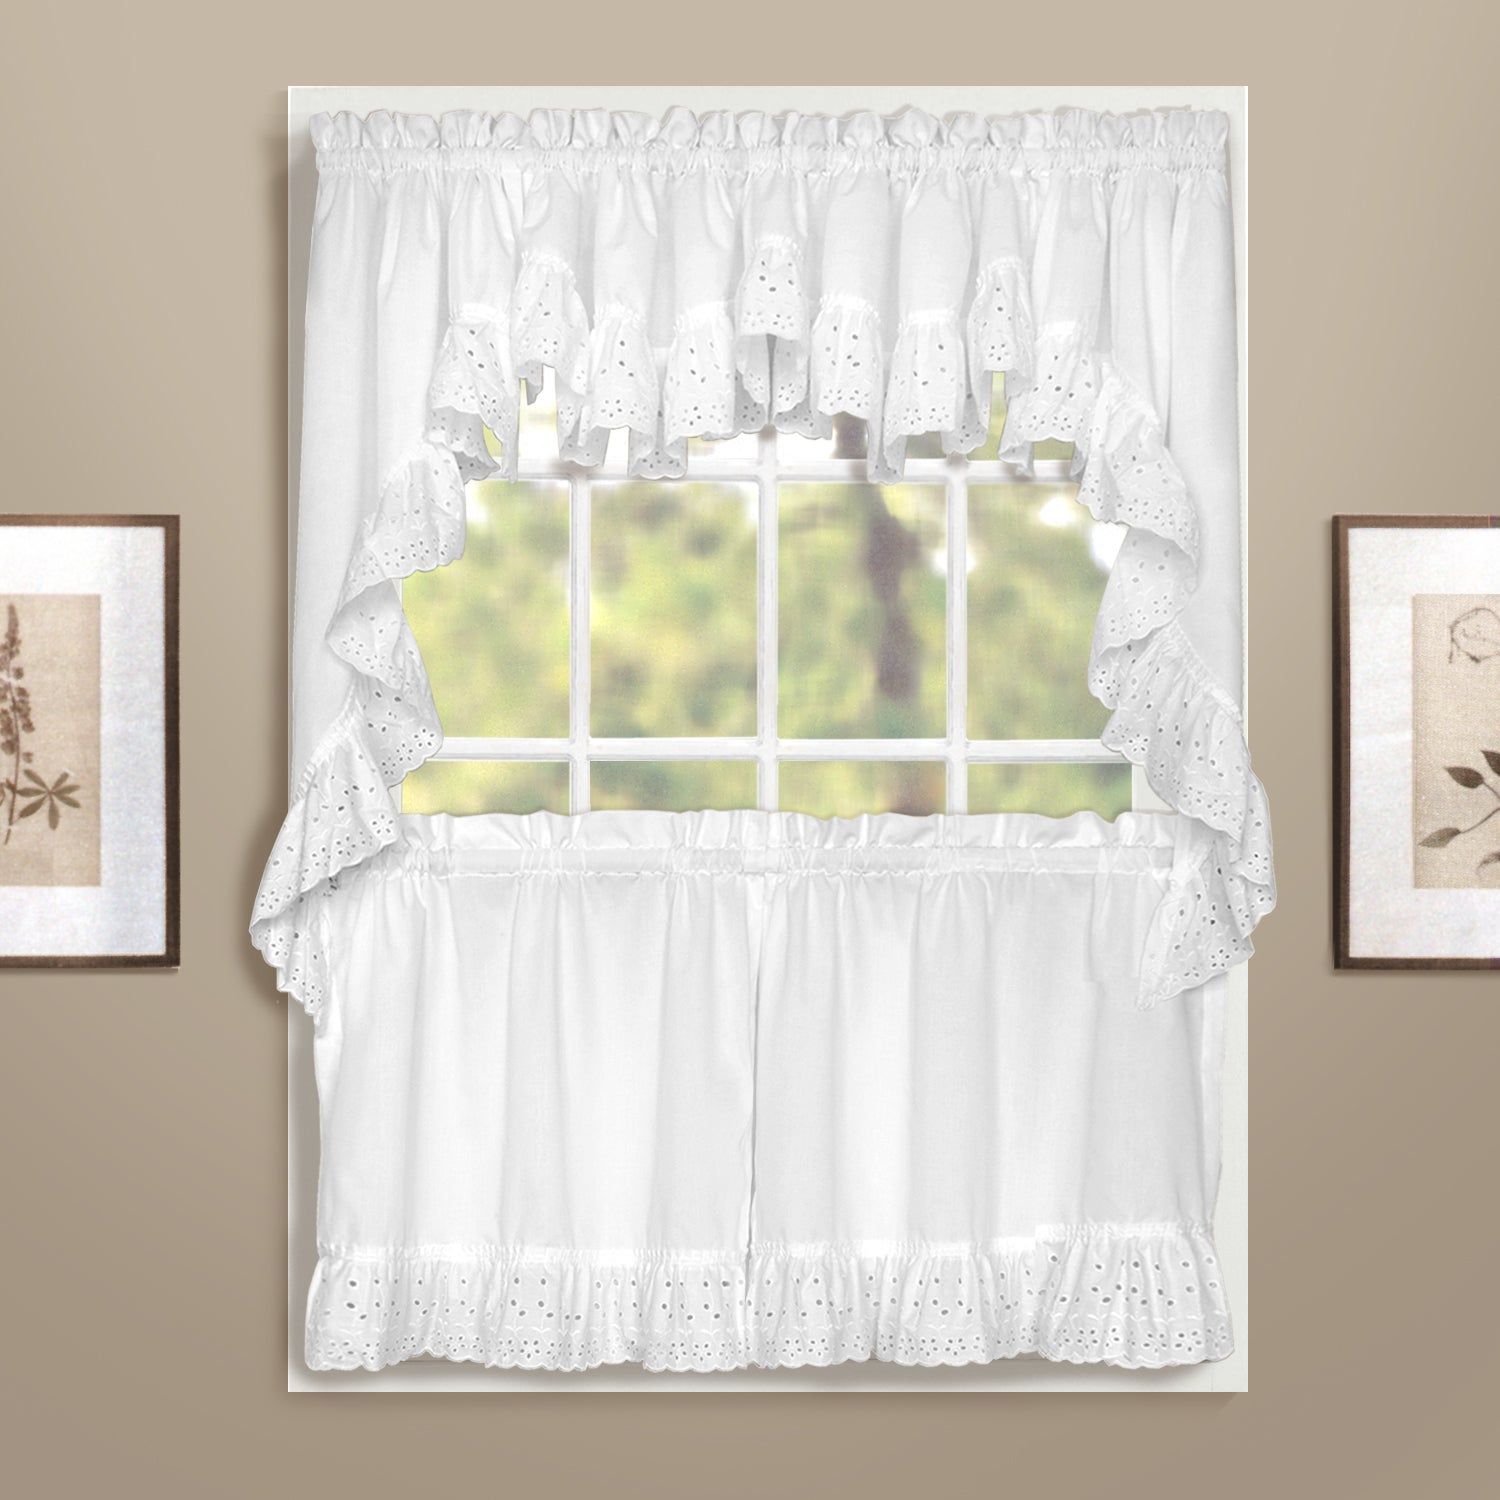 Luxury Collection Vienna Embroidered Kitchen Tier For Fluttering Butterfly White Embroidered Tier, Swag, Or Valance Kitchen Curtains (View 11 of 20)